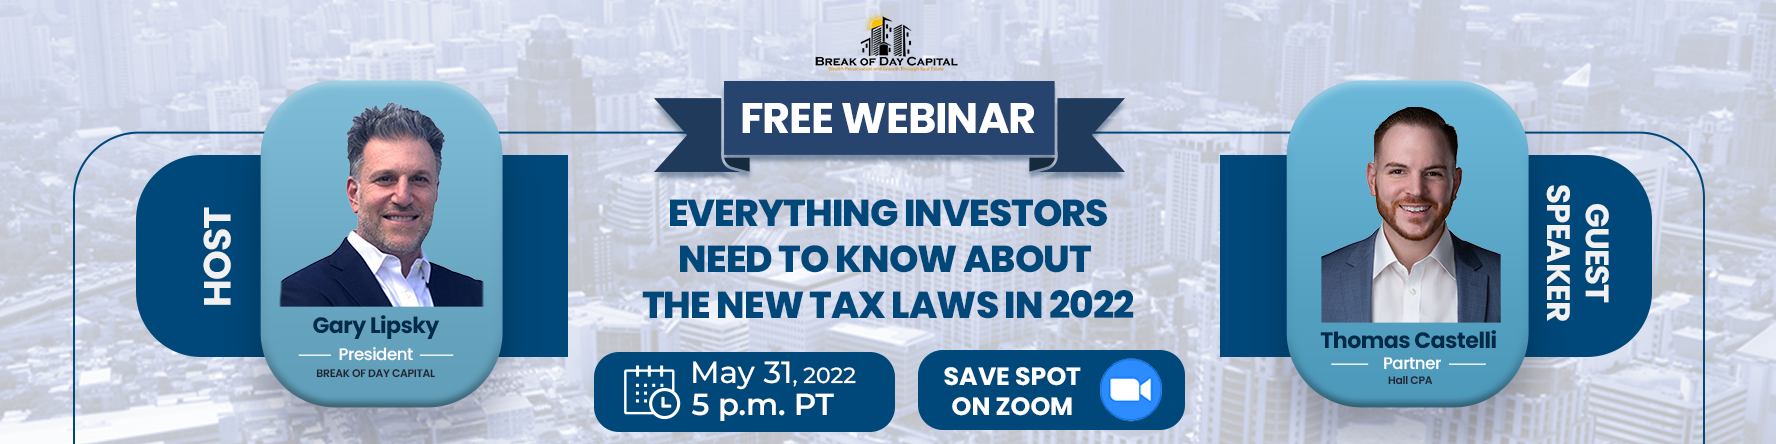 Everything Investors Need to Know About the New Tax Laws in 2022, Online Event